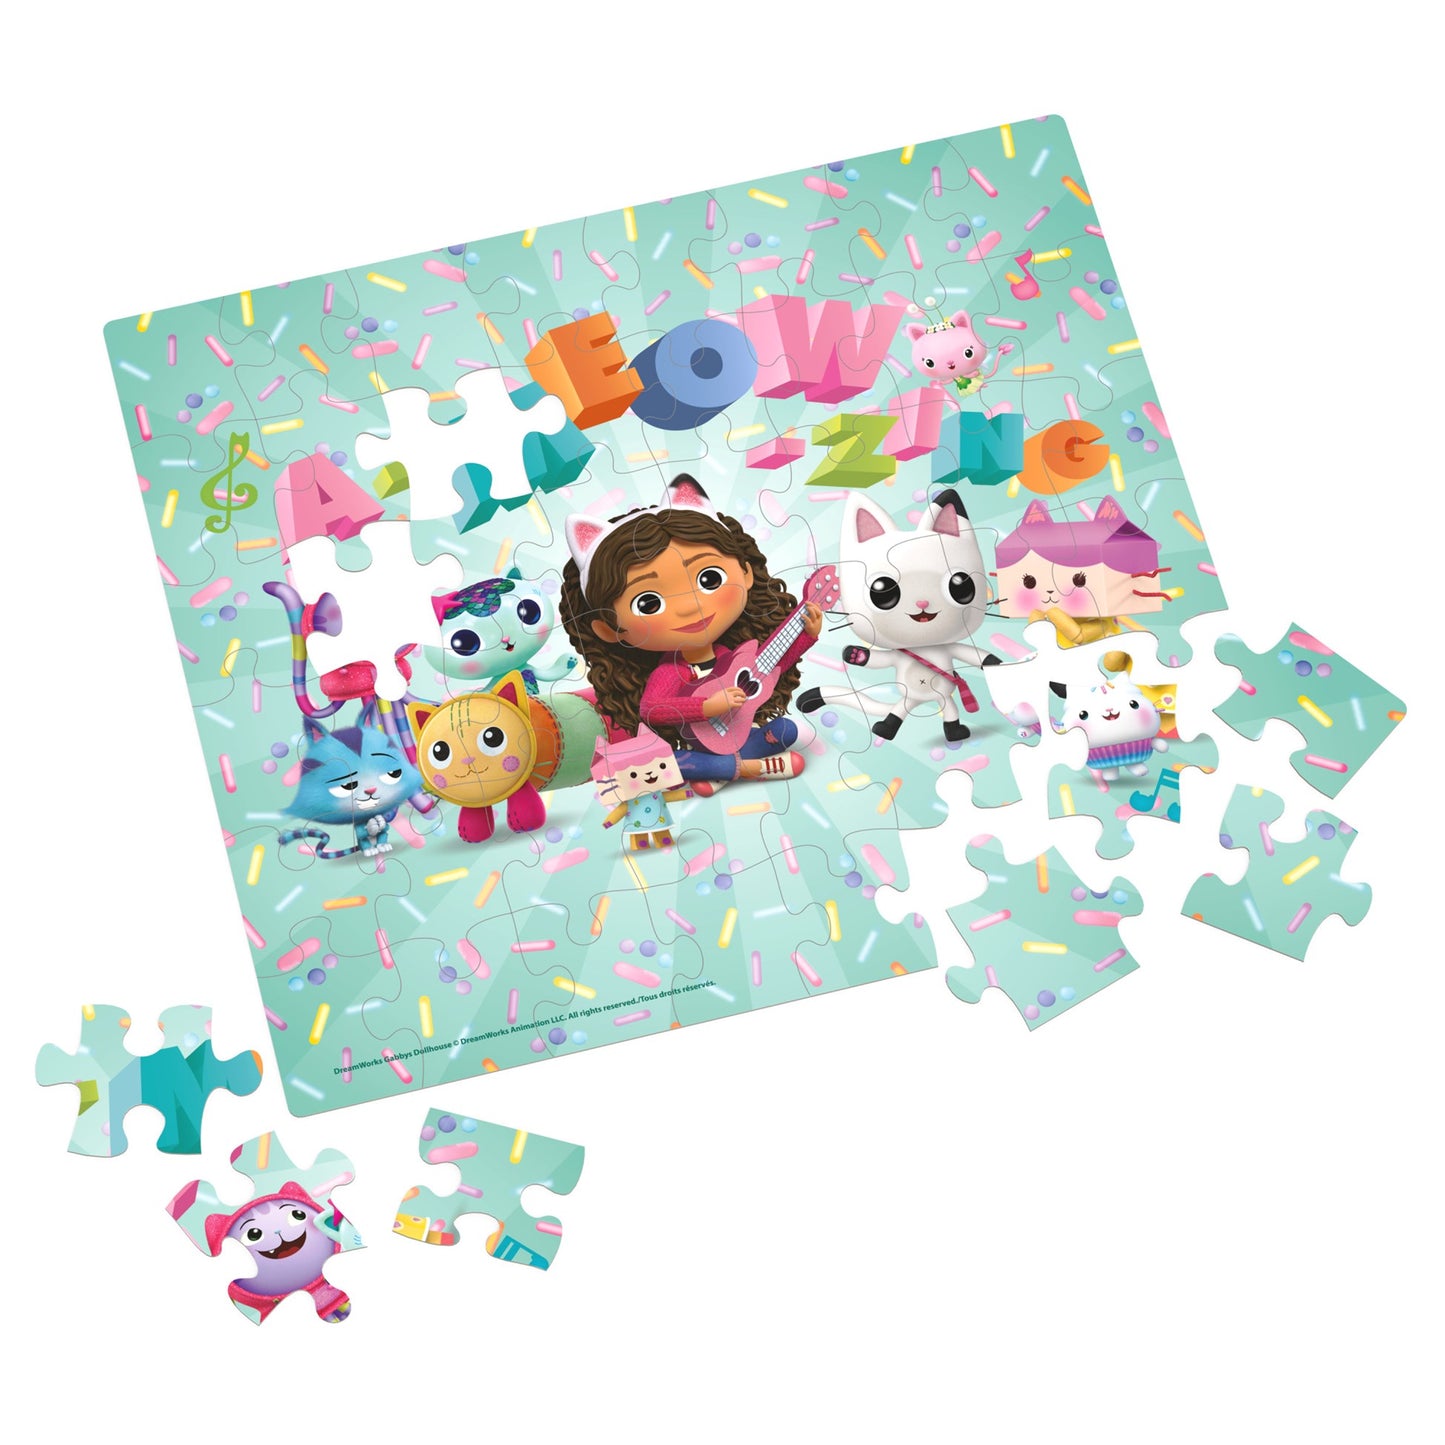 GABBY'S DOLLHOUSE CHARACTER PUZZLE 48PCS